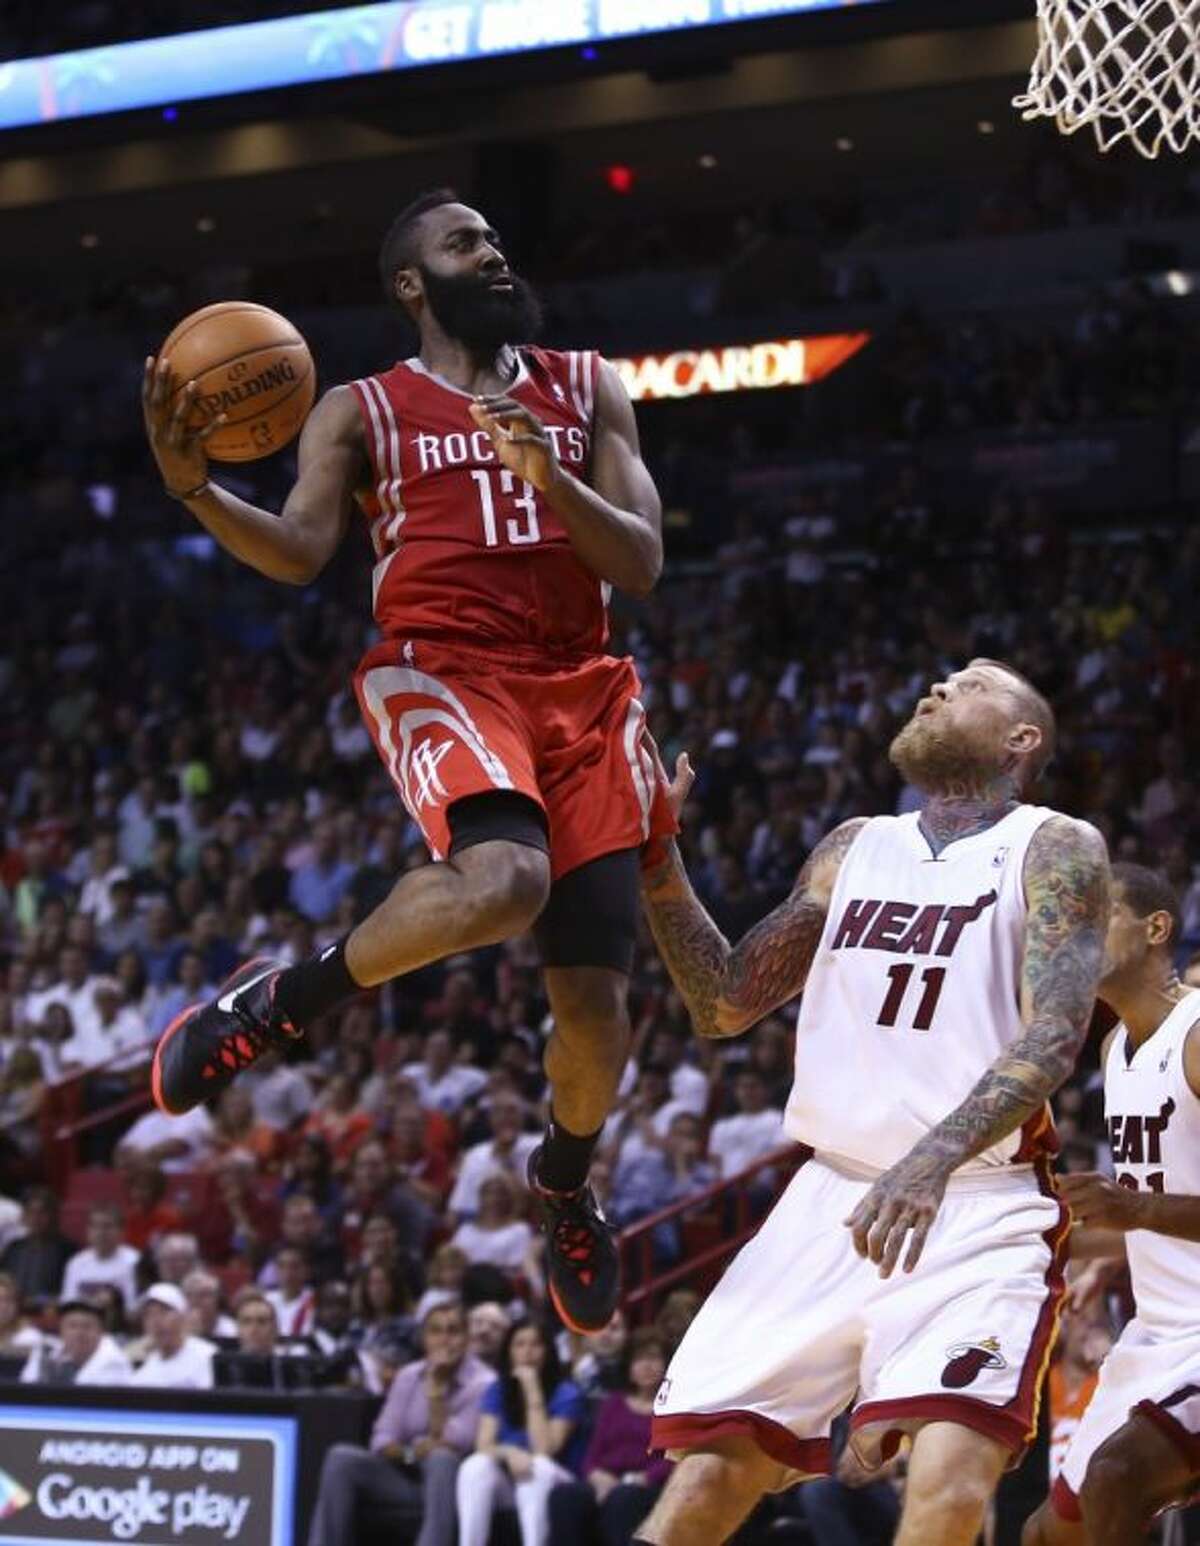 Houston Rockets guard James Harden shoots over the Miami Heat's Chris Andersen in the second half. The Heat won 113-104.